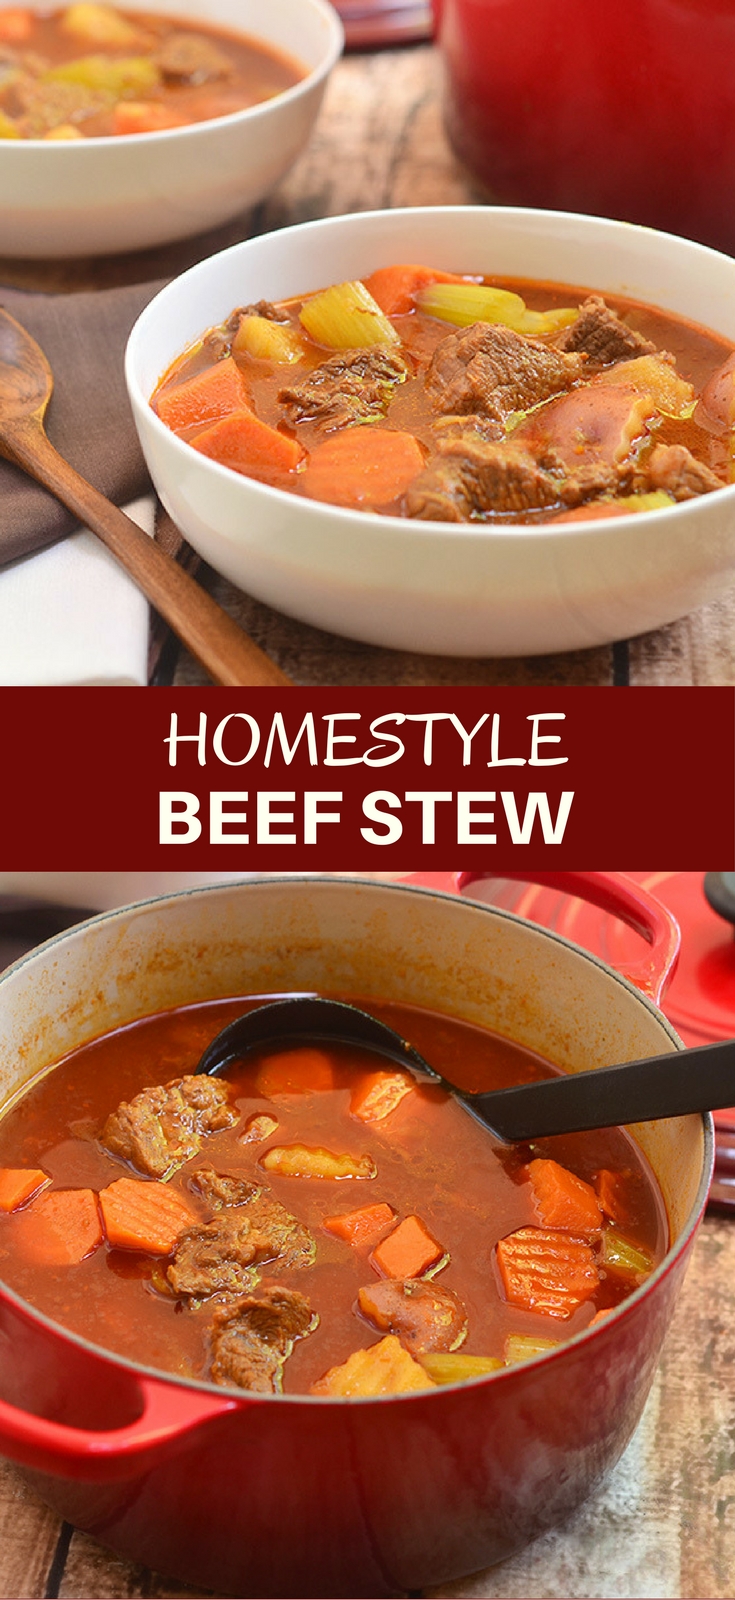 Homestyle Beef Stew is the ultimate cold weather comfort food. Chock-full of tender beef, chunky vegetables, and a flavorful broth, it's hearty and delicious!